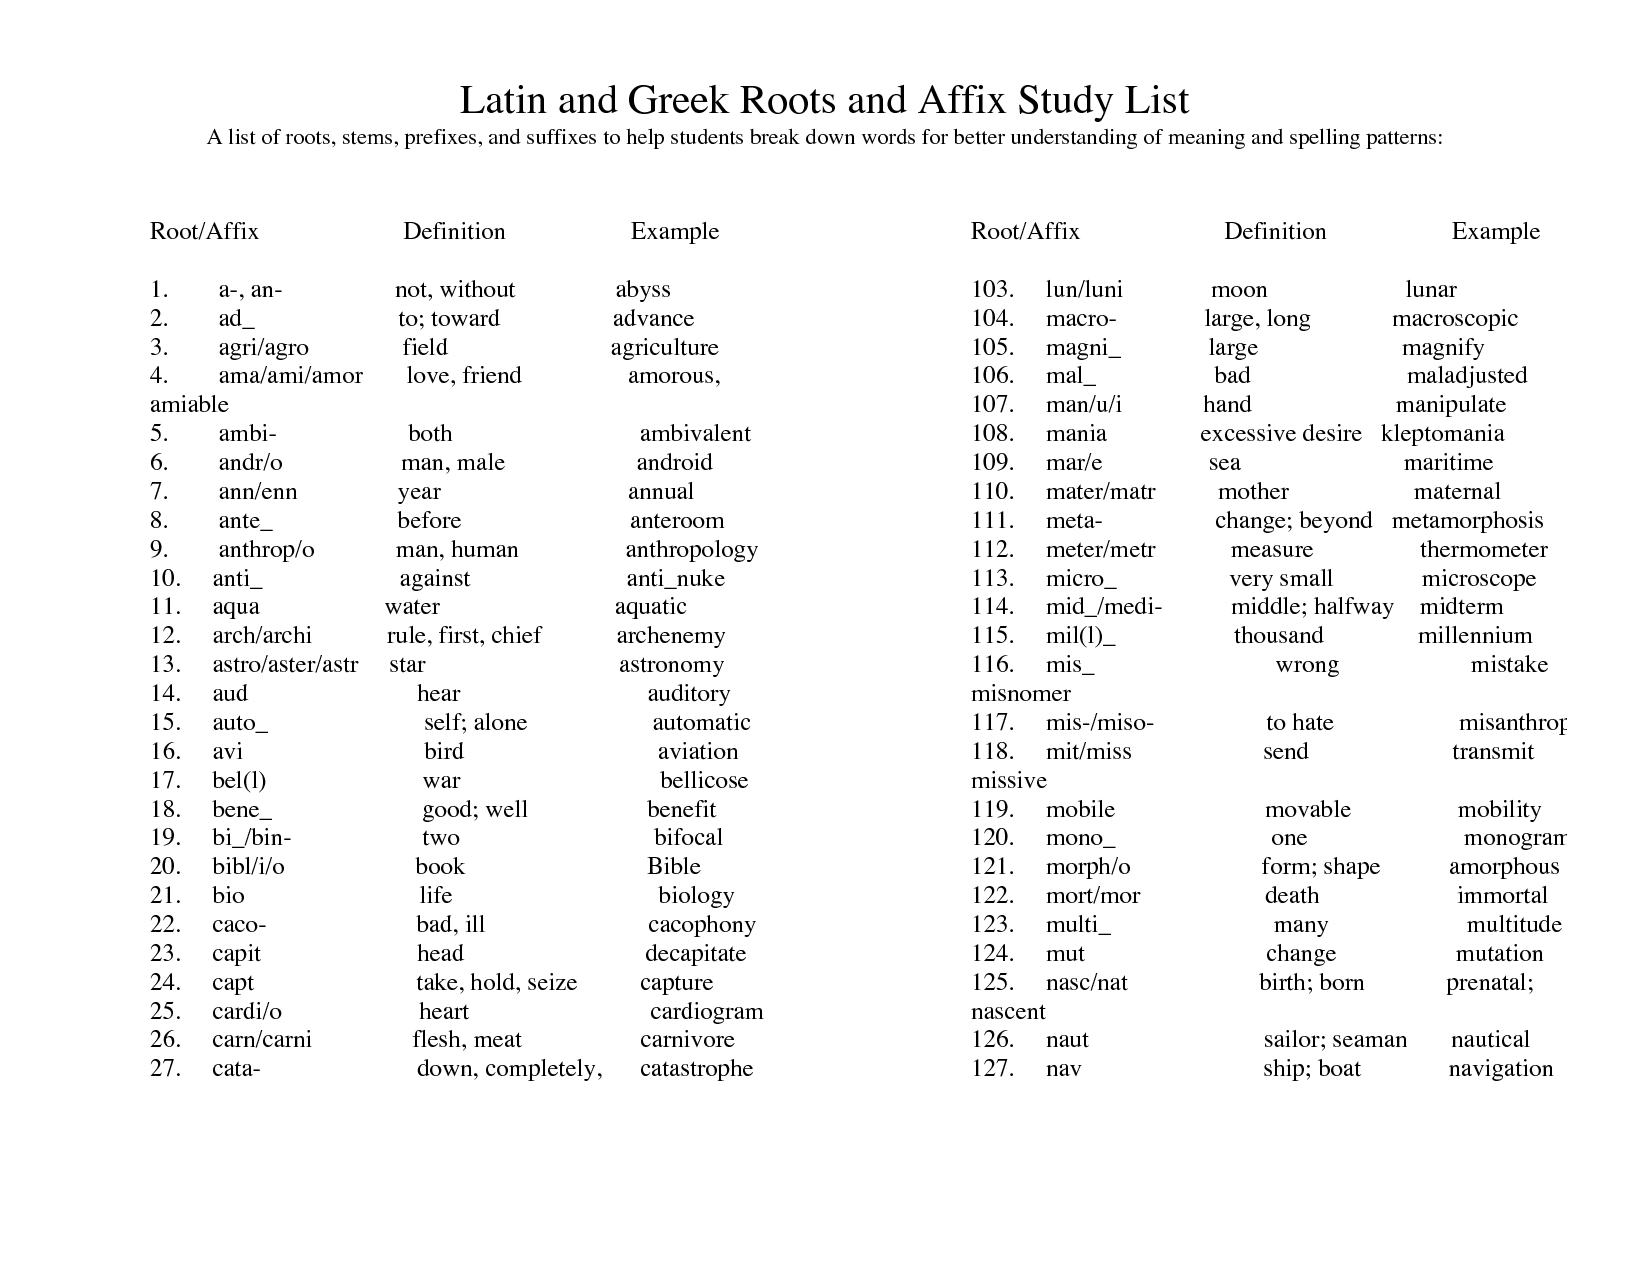 Greek and Latin Roots List